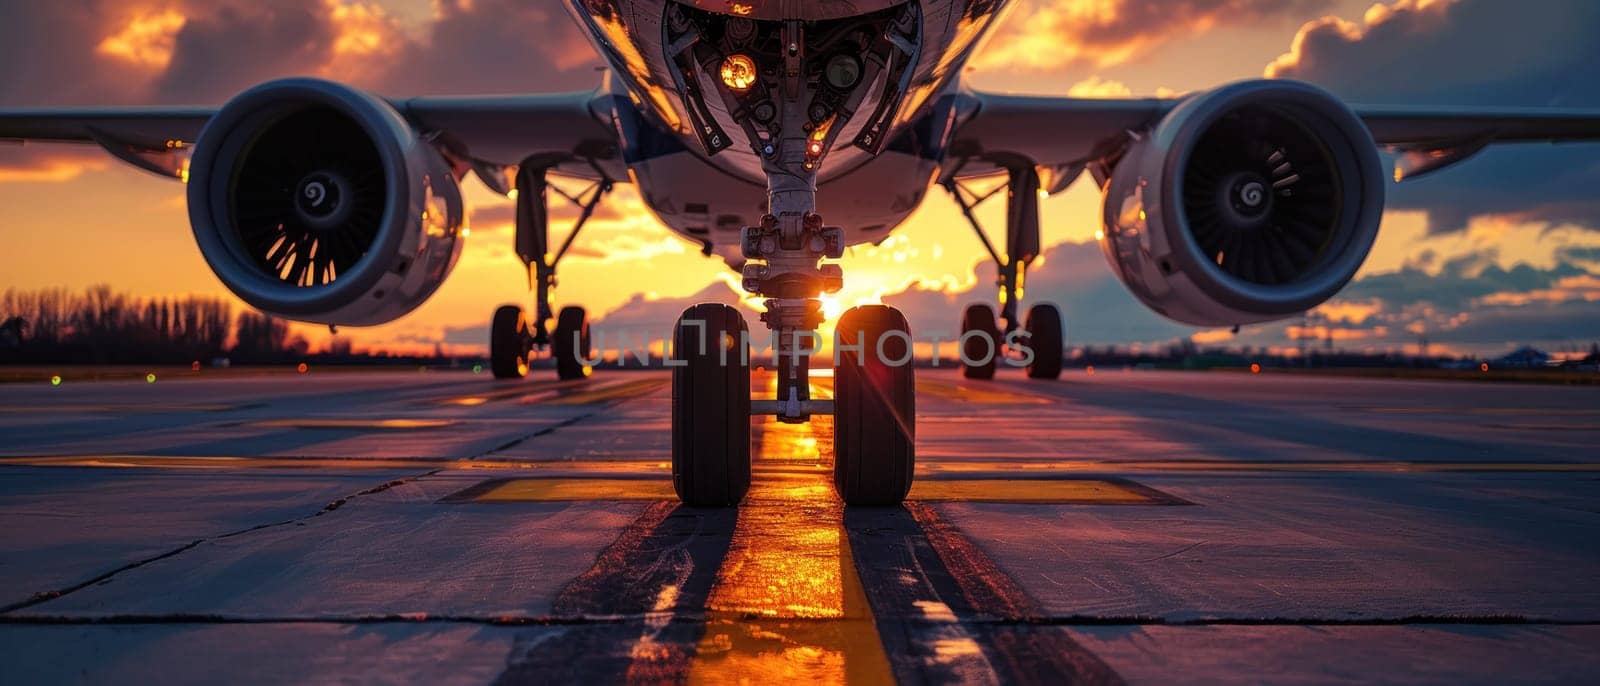 A large jet is on the runway with the sun setting in the background. The plane is on the tarmac and the runway is wet